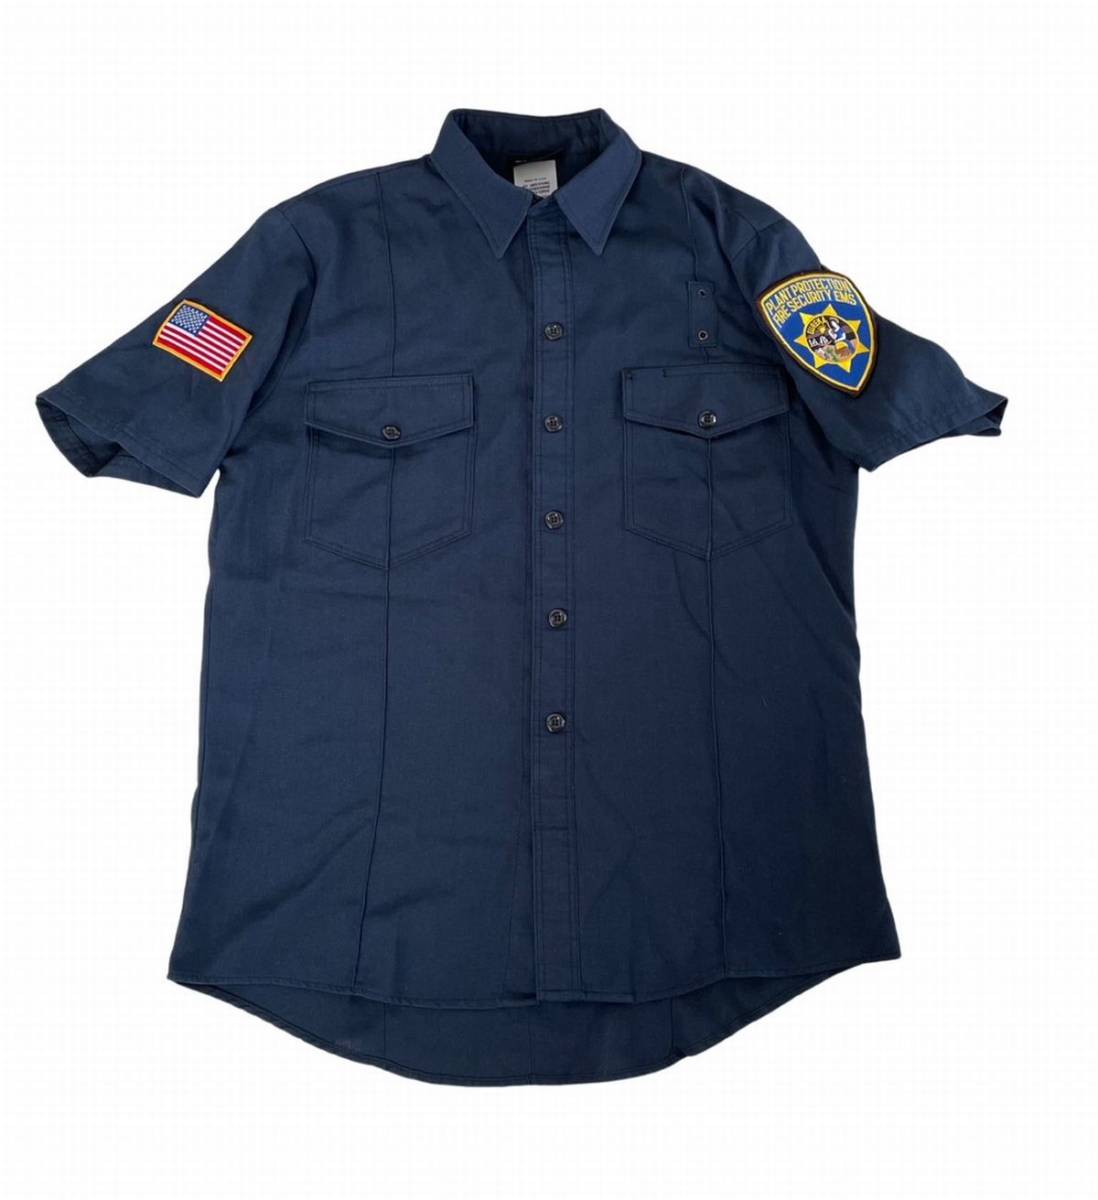 [2489] the truth thing LAFD Los Angeles district fire fighting .no-meks made ( flame retardance fiber ) America made size 42 patch attaching large size 